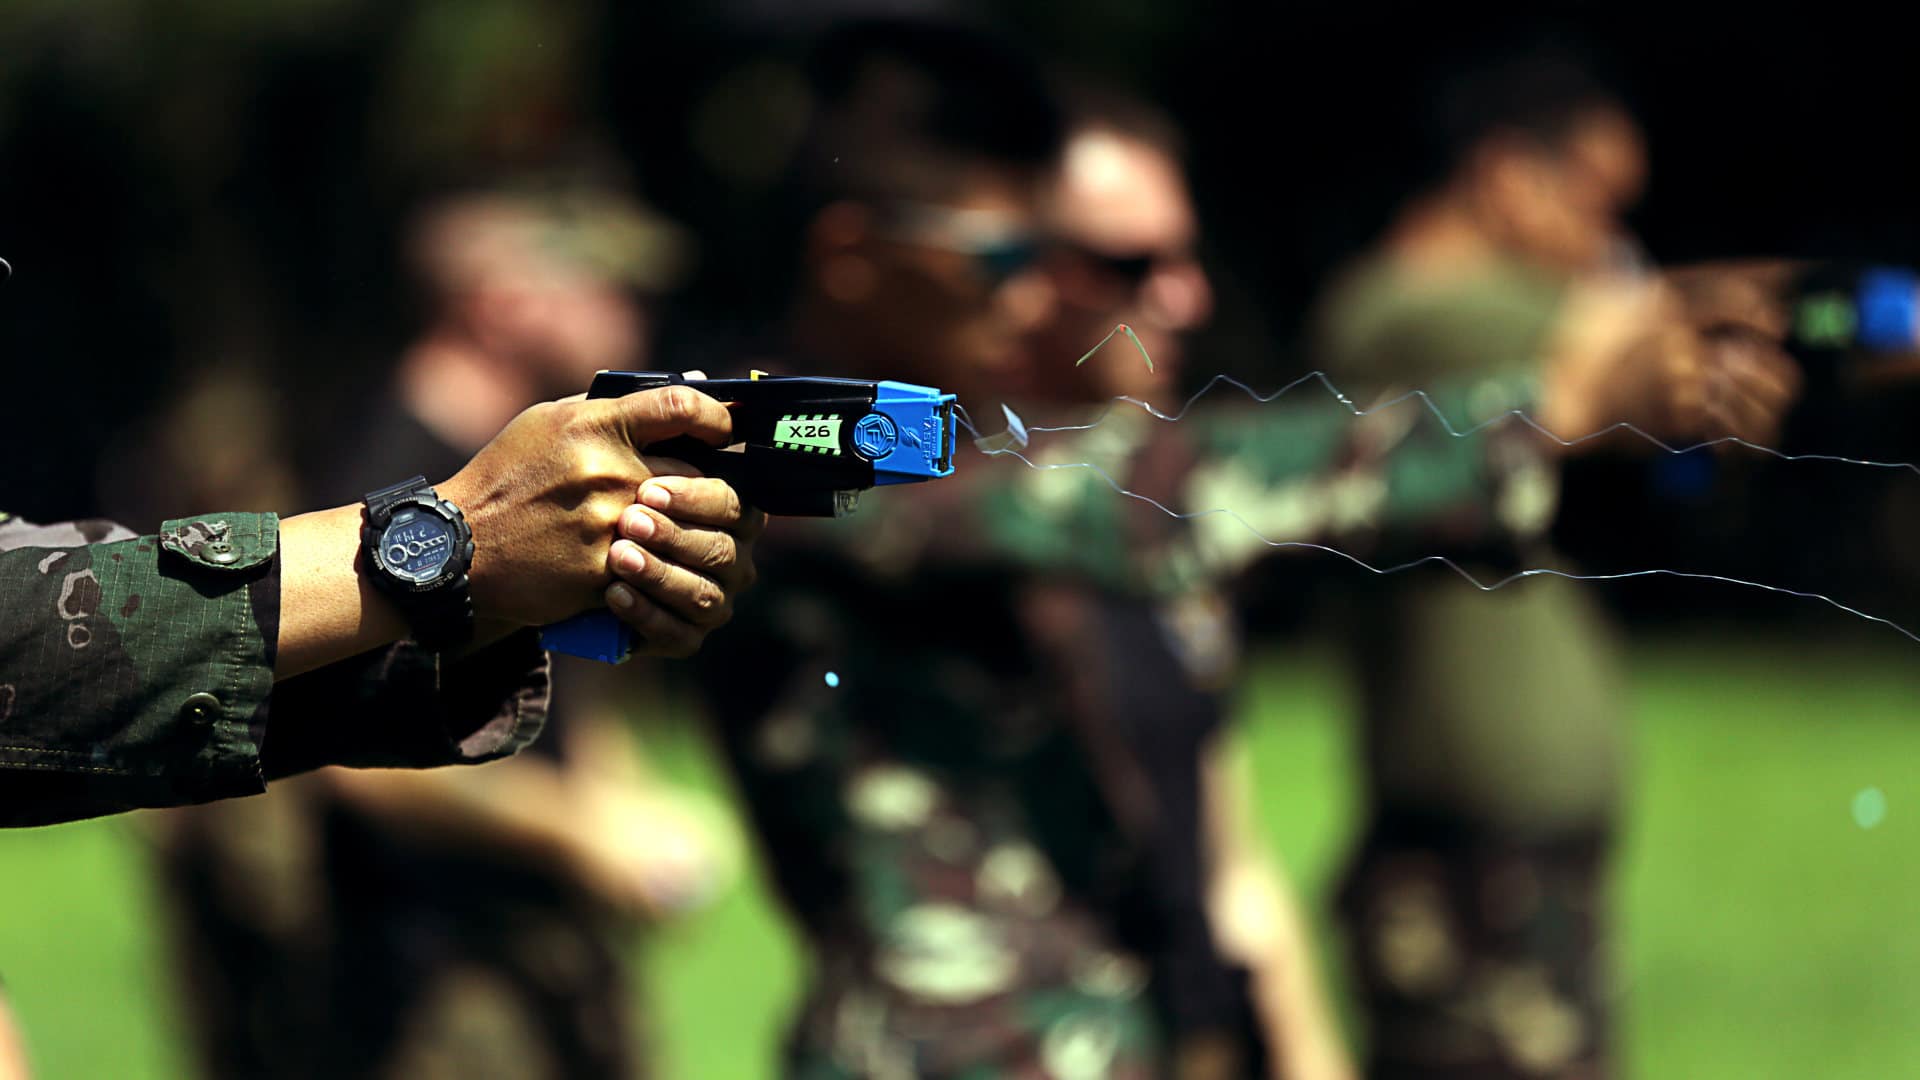 Armed Forces practice using Tasers during a qualification training.